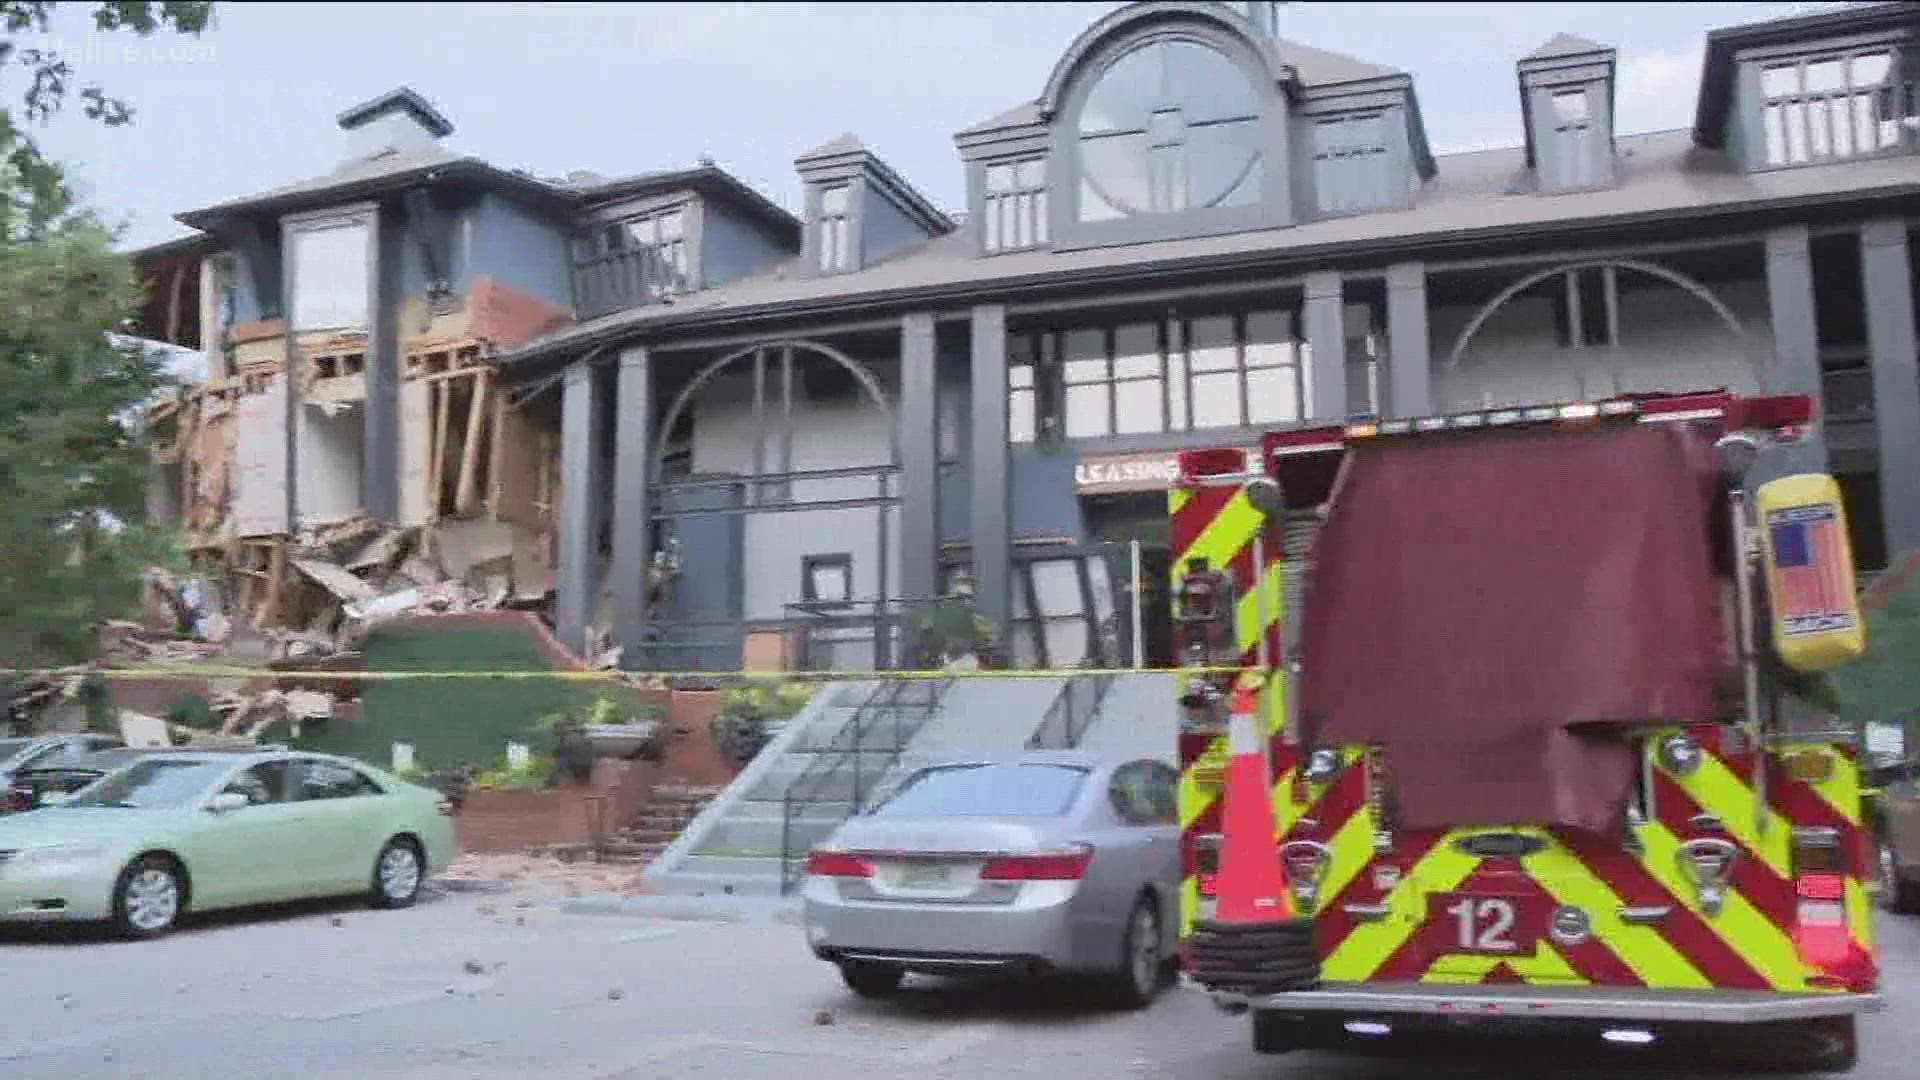 The city of Dunwoody said that an on-site inspection revealed two leaks in a building not involved in the explosion.